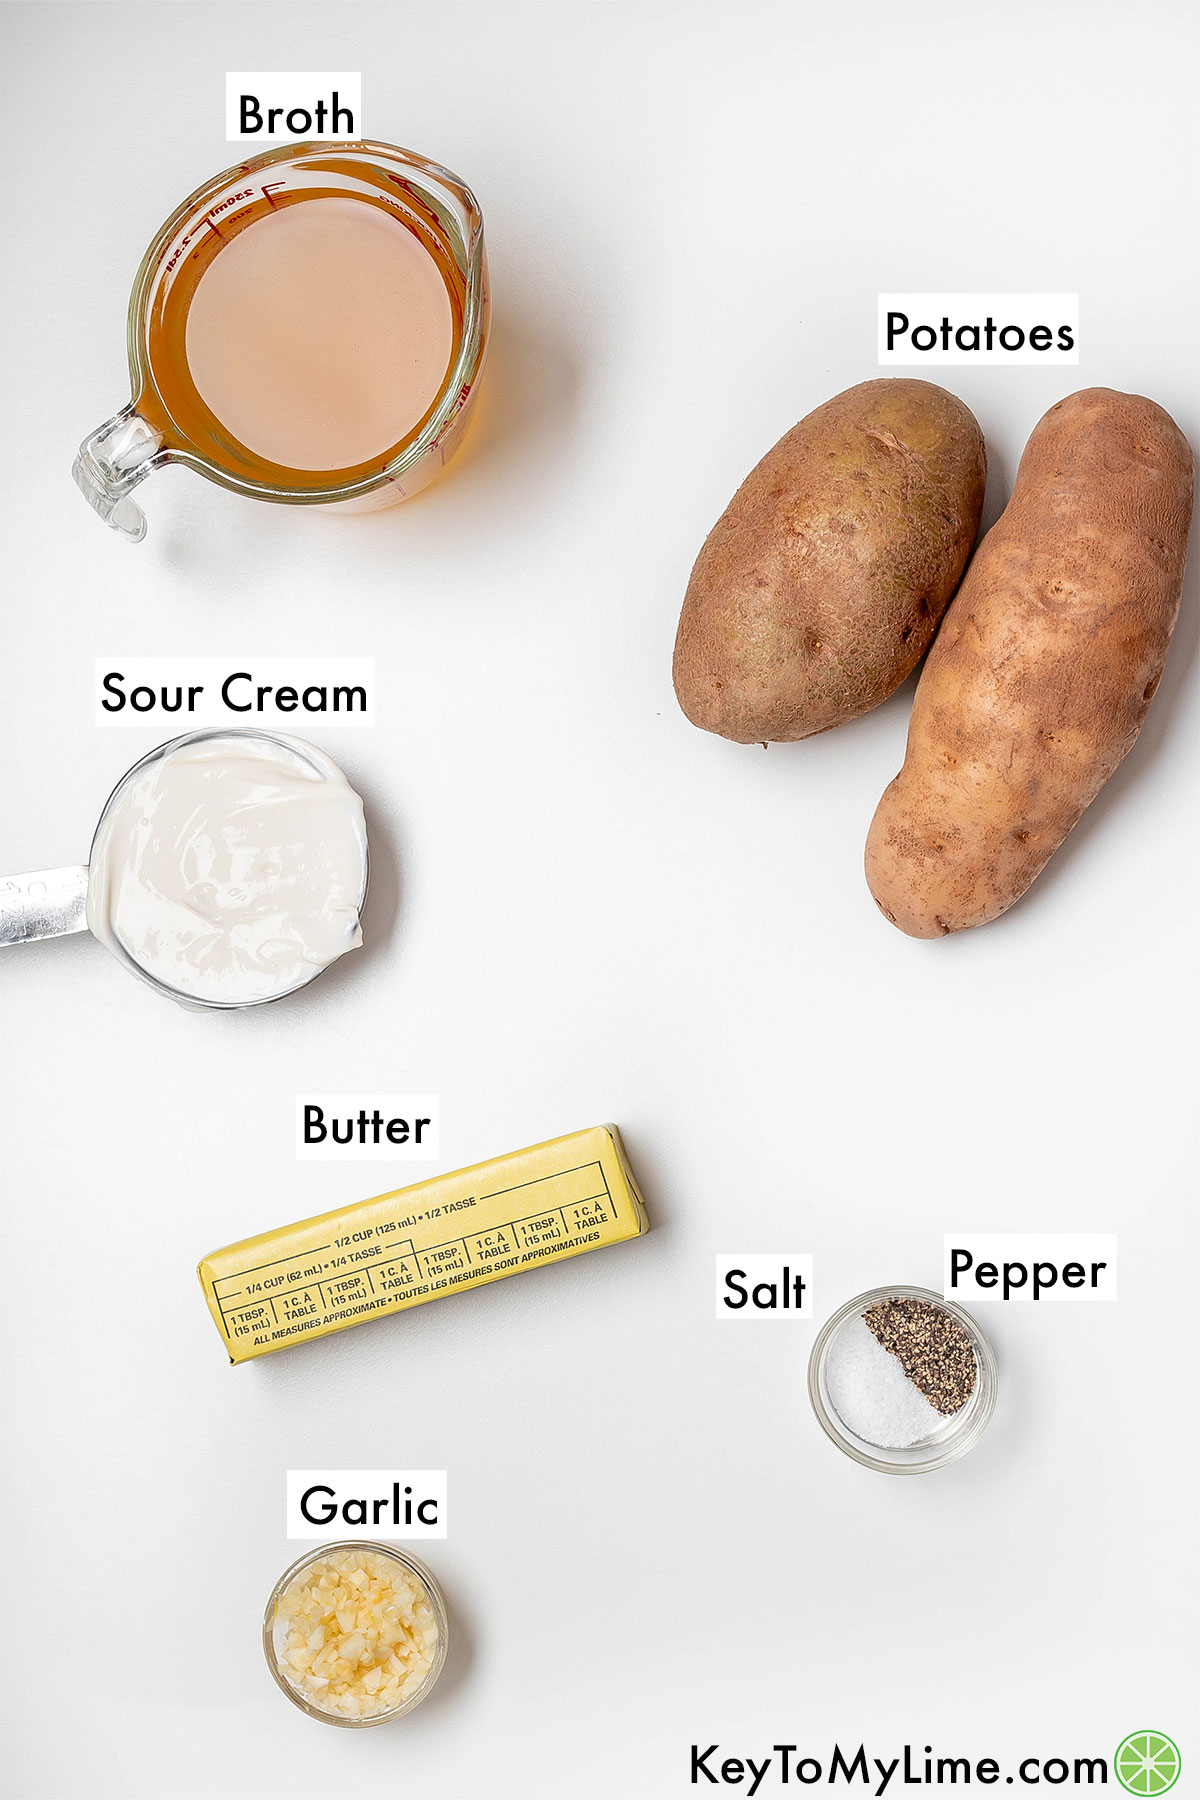 The labeled ingredients for mashed potatoes without milk.